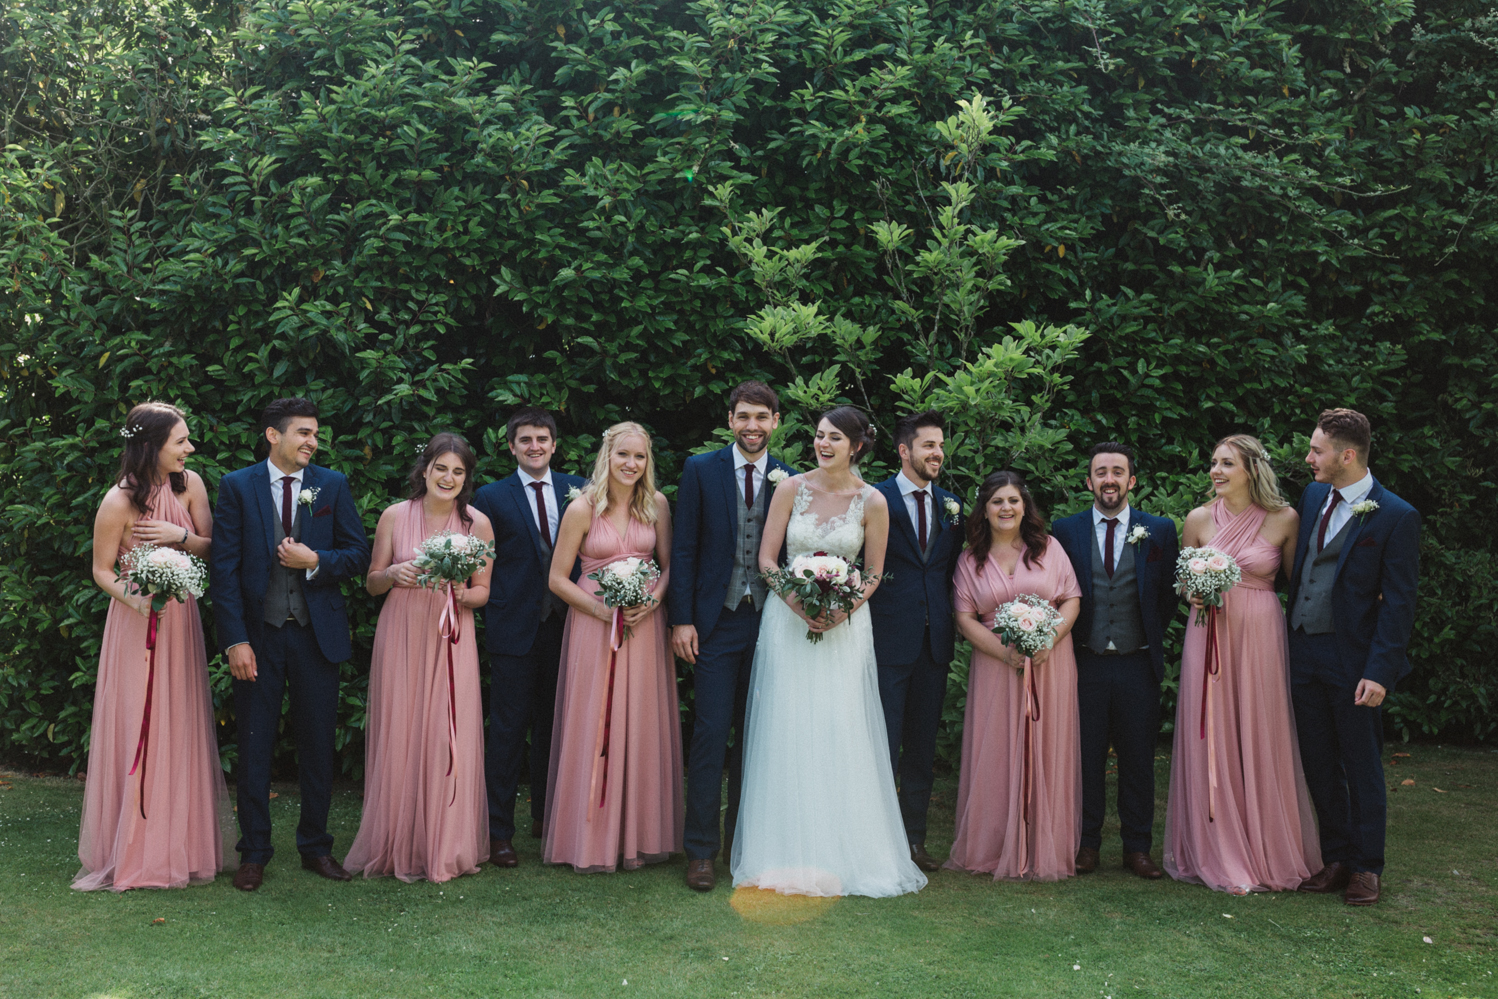 outdoors bridal party portraits at a natural pretty elms barn wedding in suffolk